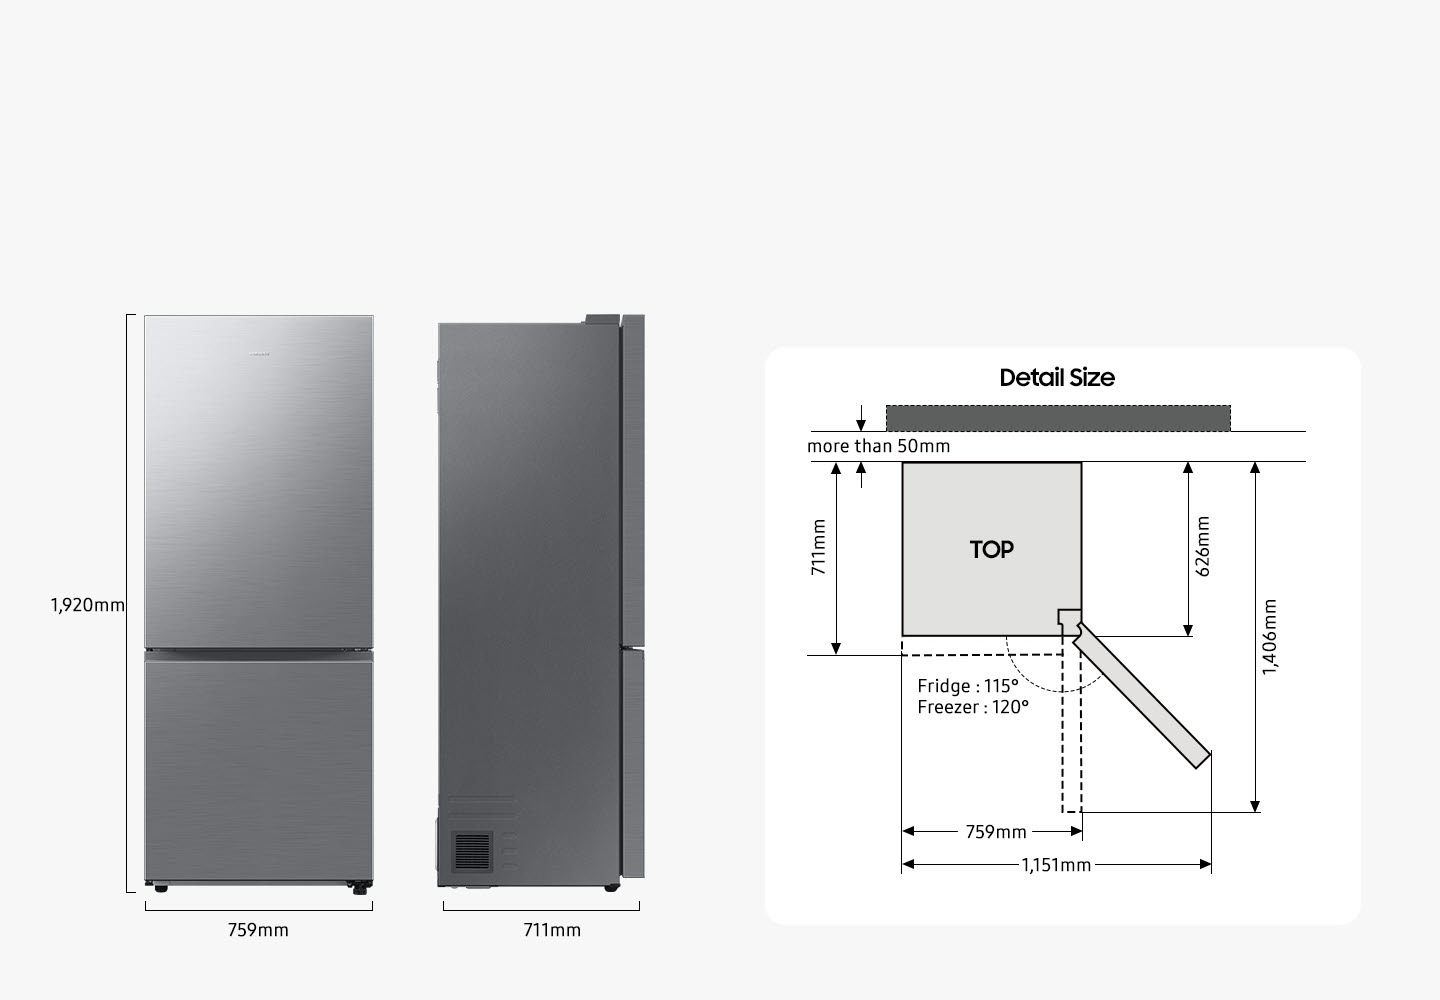 There are front and side views of RB6000D. The RB6000D is 1,920mm in height, 759mm in width, and 711mm in depth. Detailed sizes for installation are explained in the following TOP view. RB6000D must be placed more than 50mm away from the wall. The width of the product is 759mm, but when the door is opened, it is 1,151mm. The product depth is 626mm excluding the door and 1,406mm when the door is fully open at Fridge 115º and Freezer 120º. And the depth including the door is 711mm.